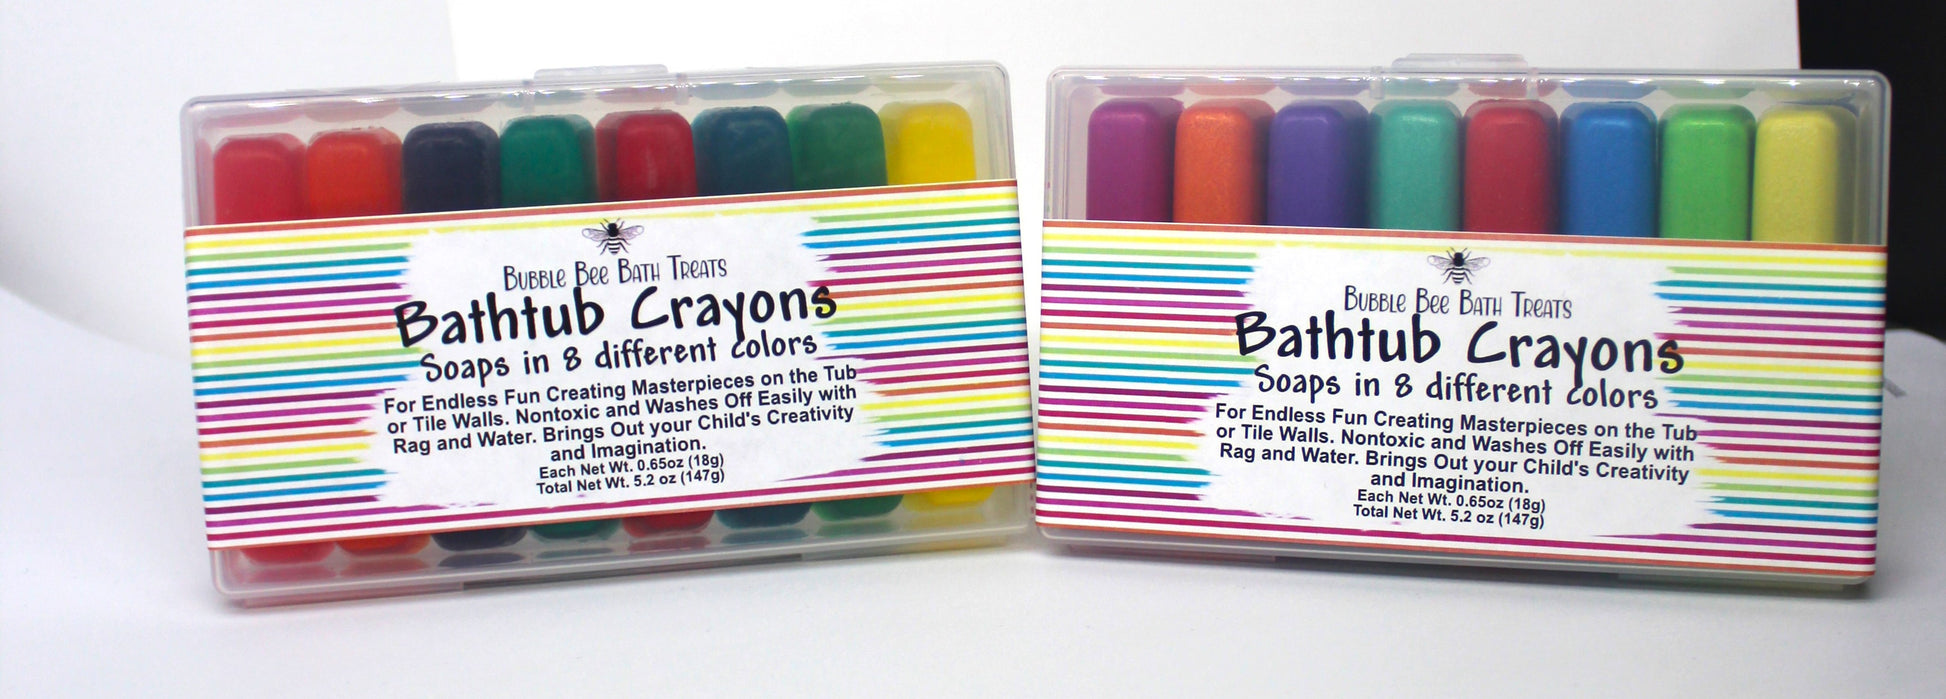 Get Your Cray On!® Crayons - 8 pack